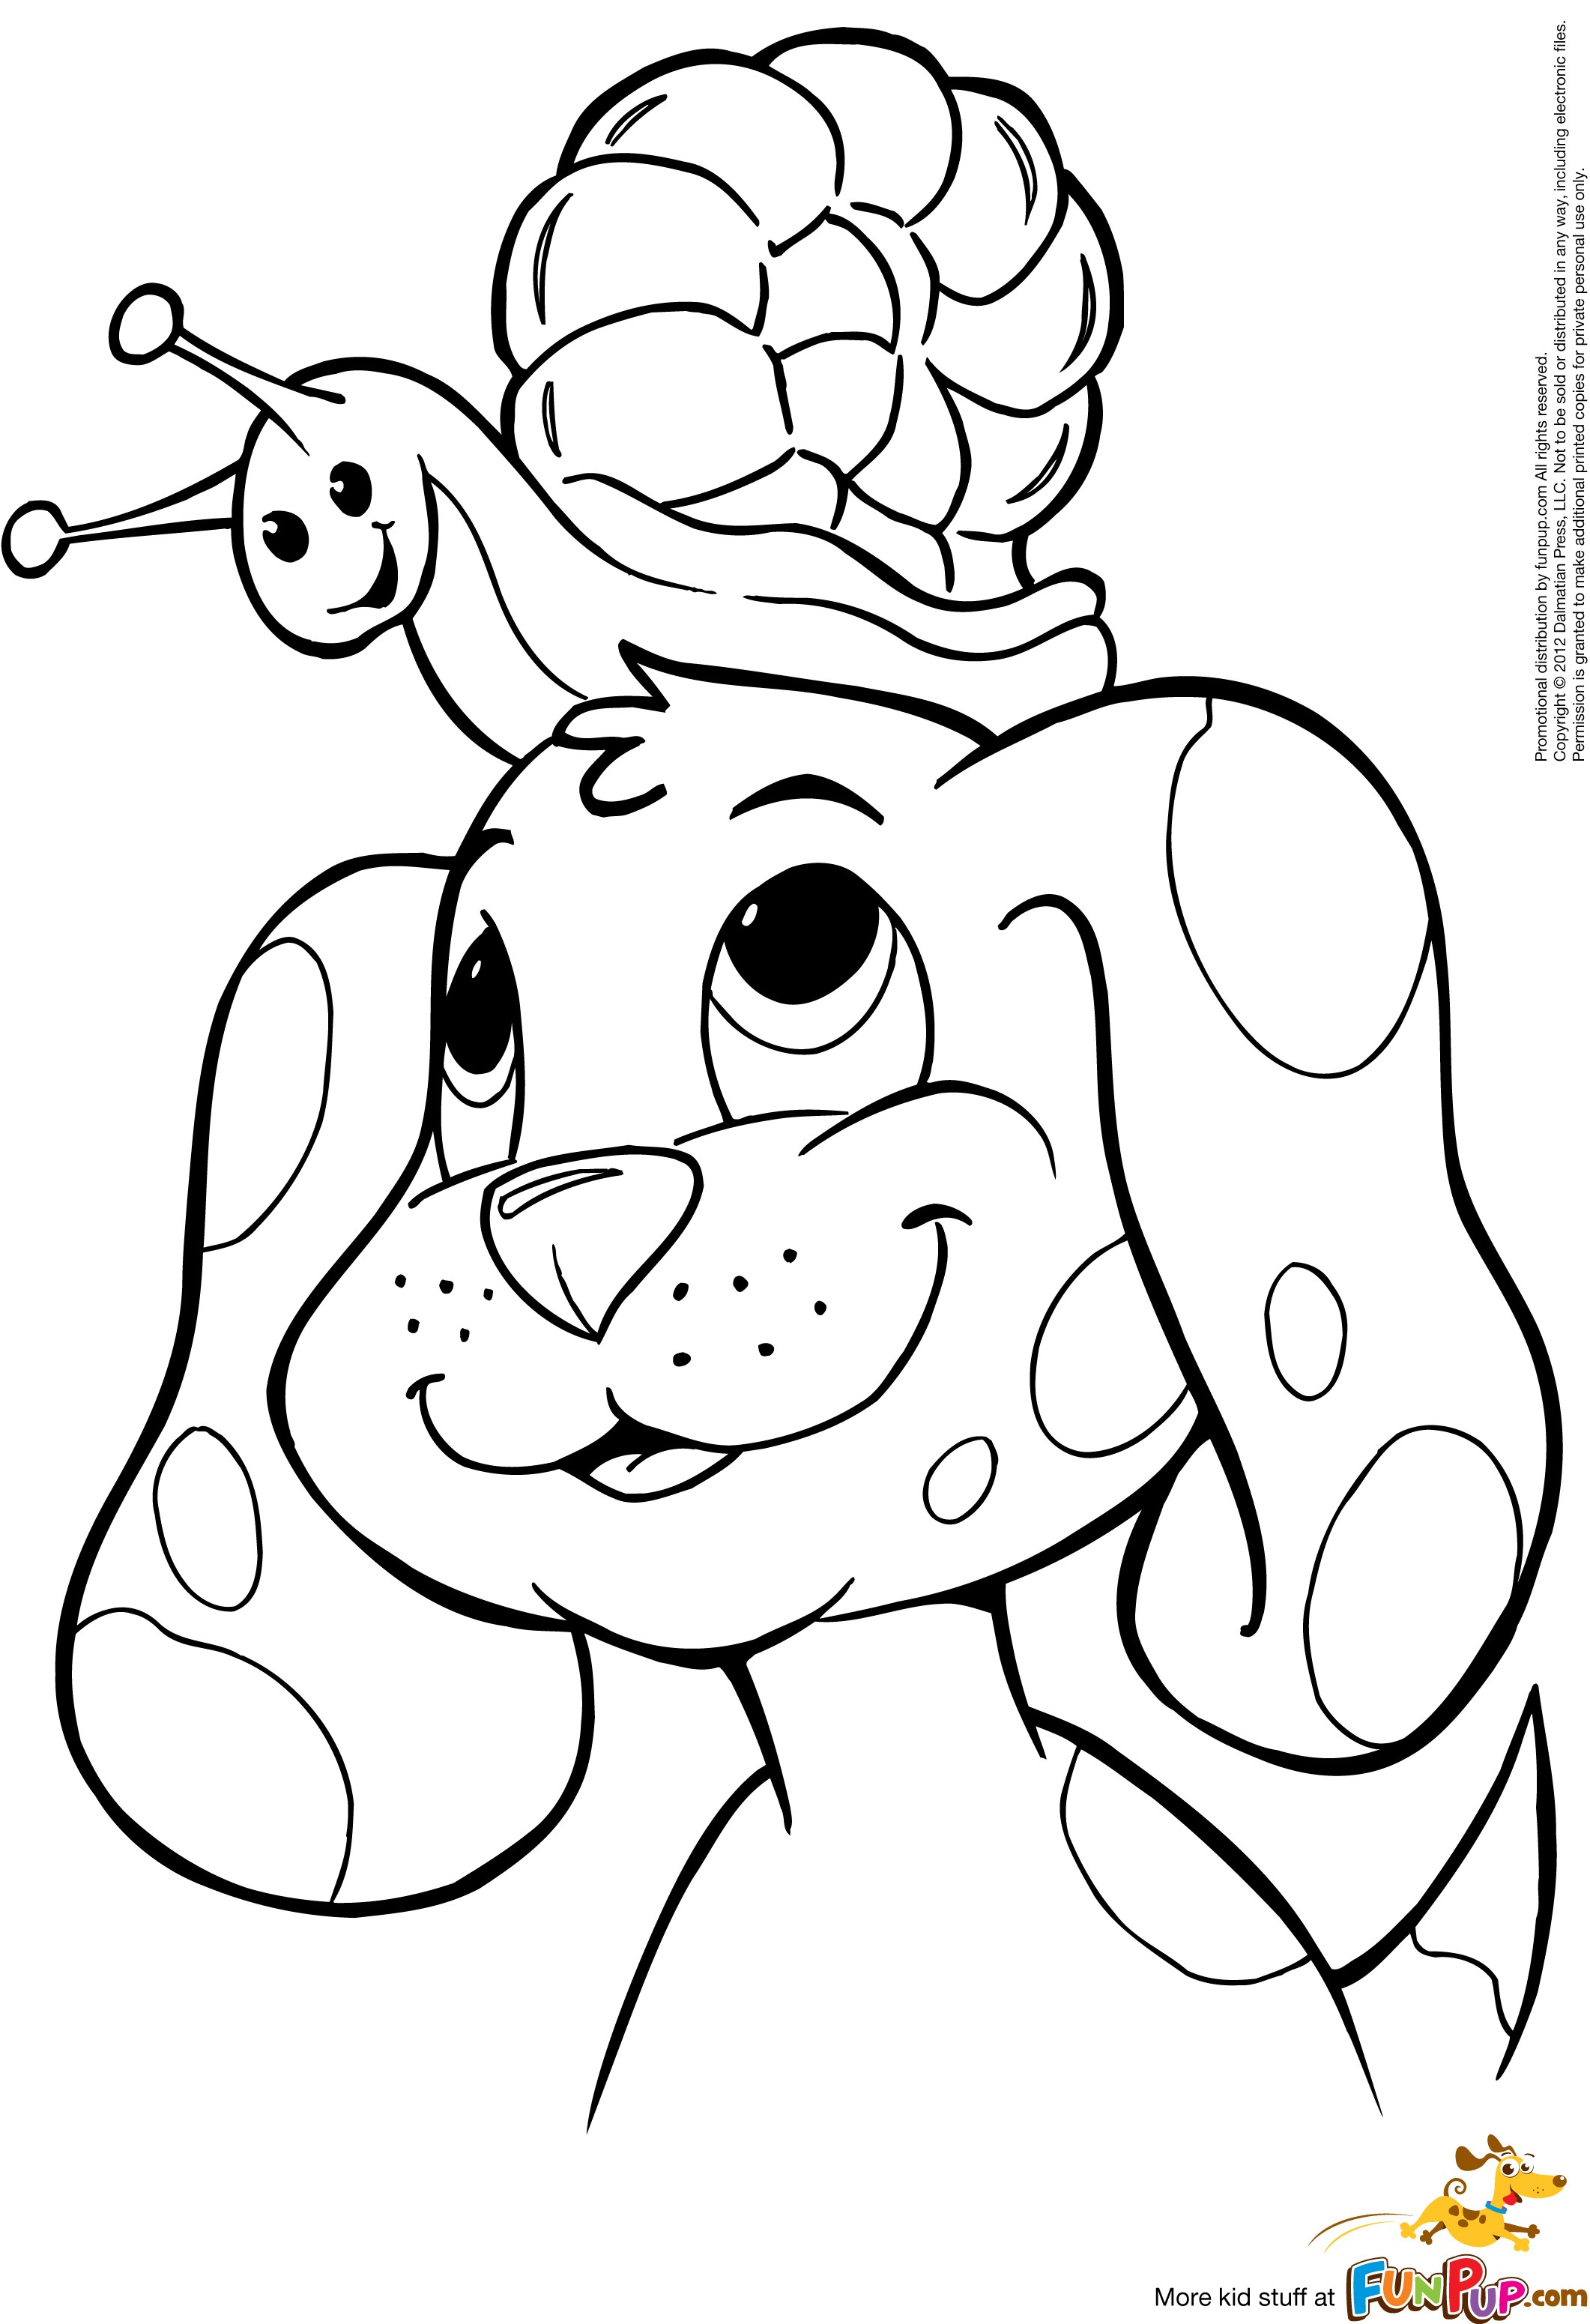 Easy Puppy Coloring Pages at GetColorings.com | Free ...